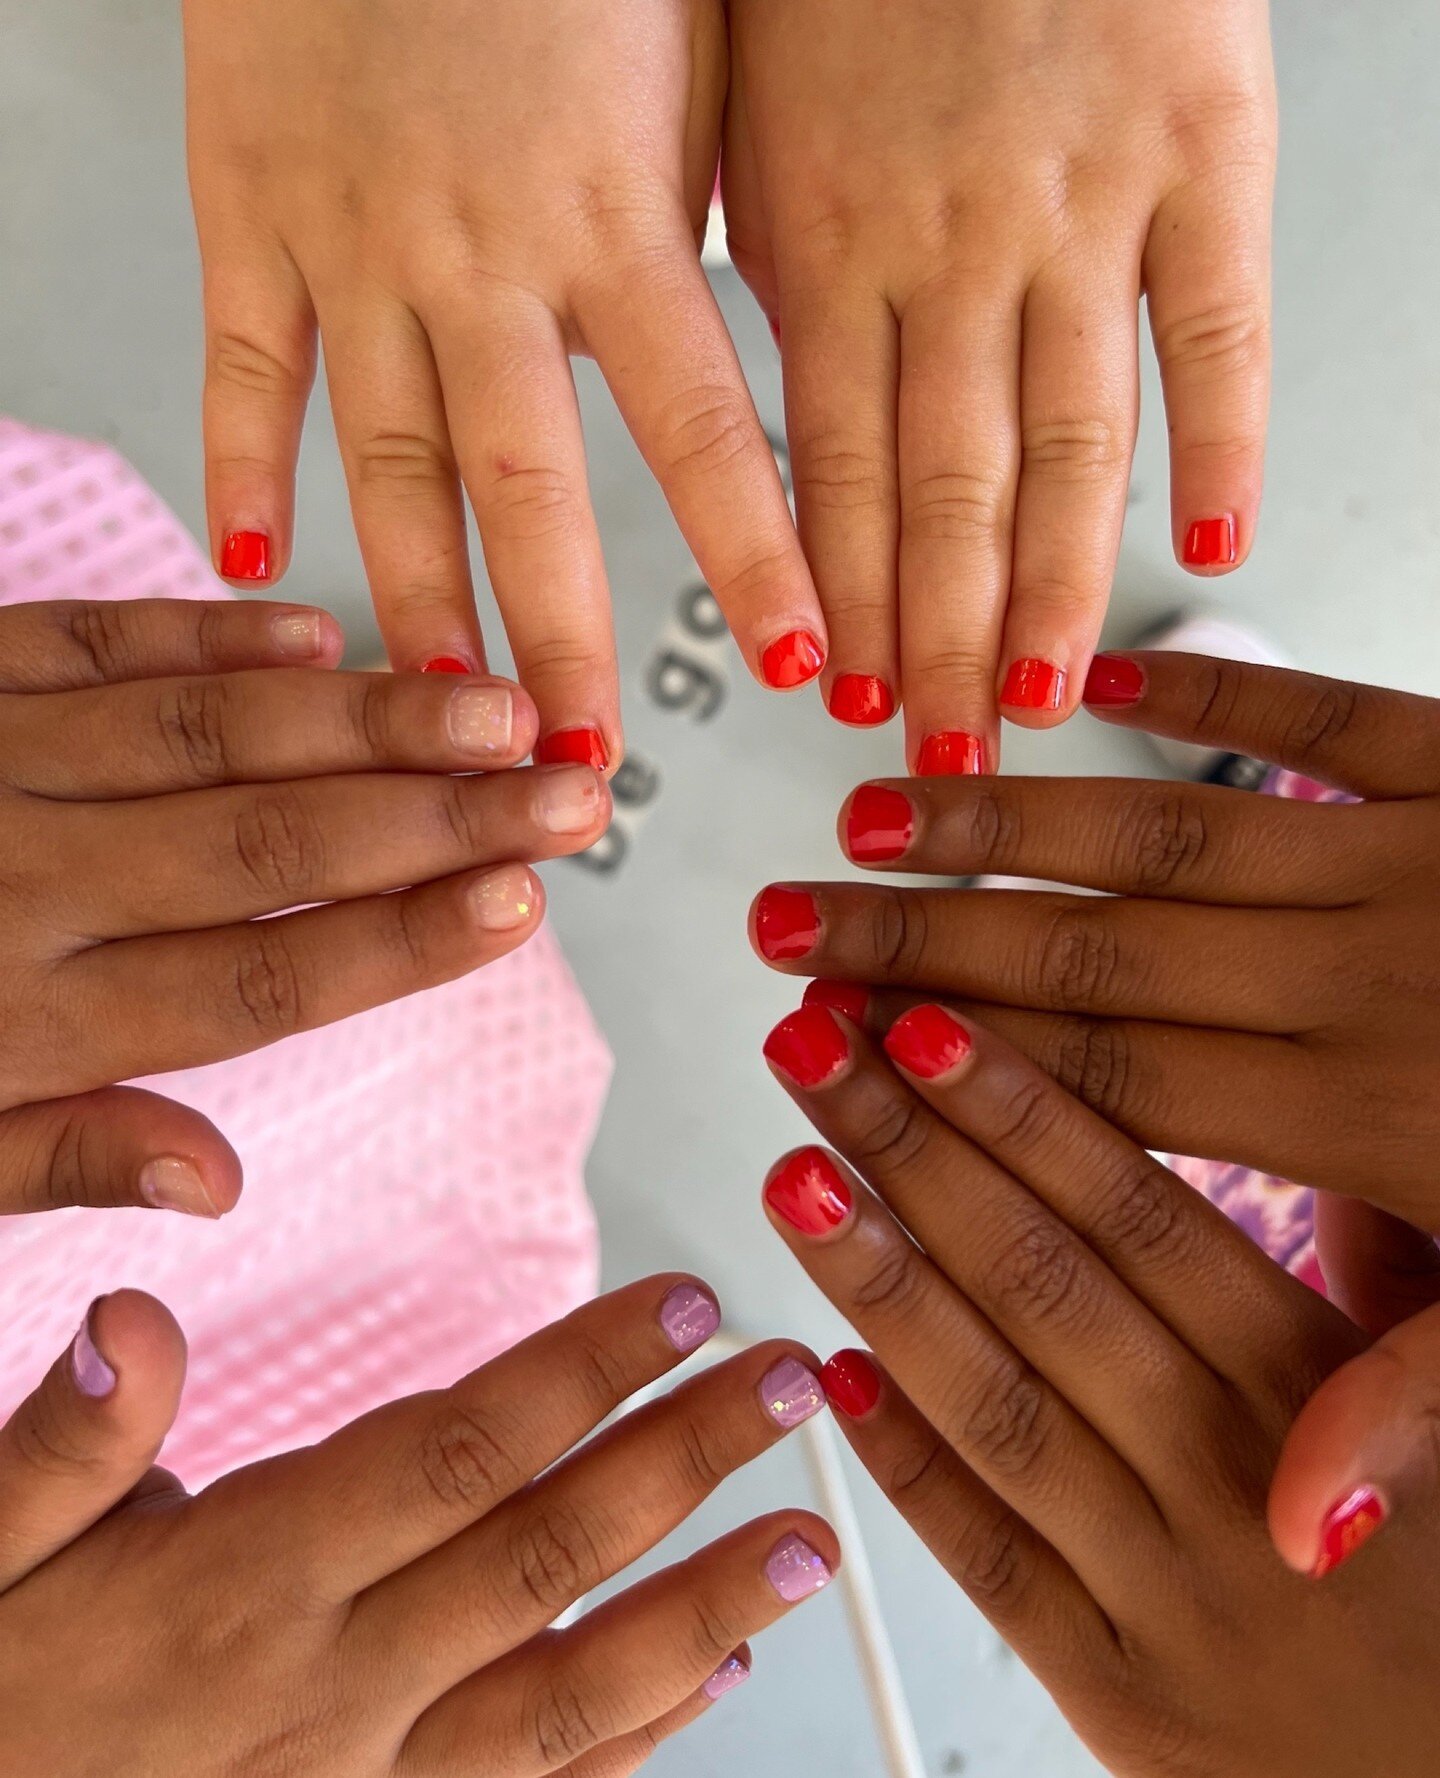 Girls just wanna have fun (and amazing nails). Let's make it happen with a girls' nail day! 💅⁠